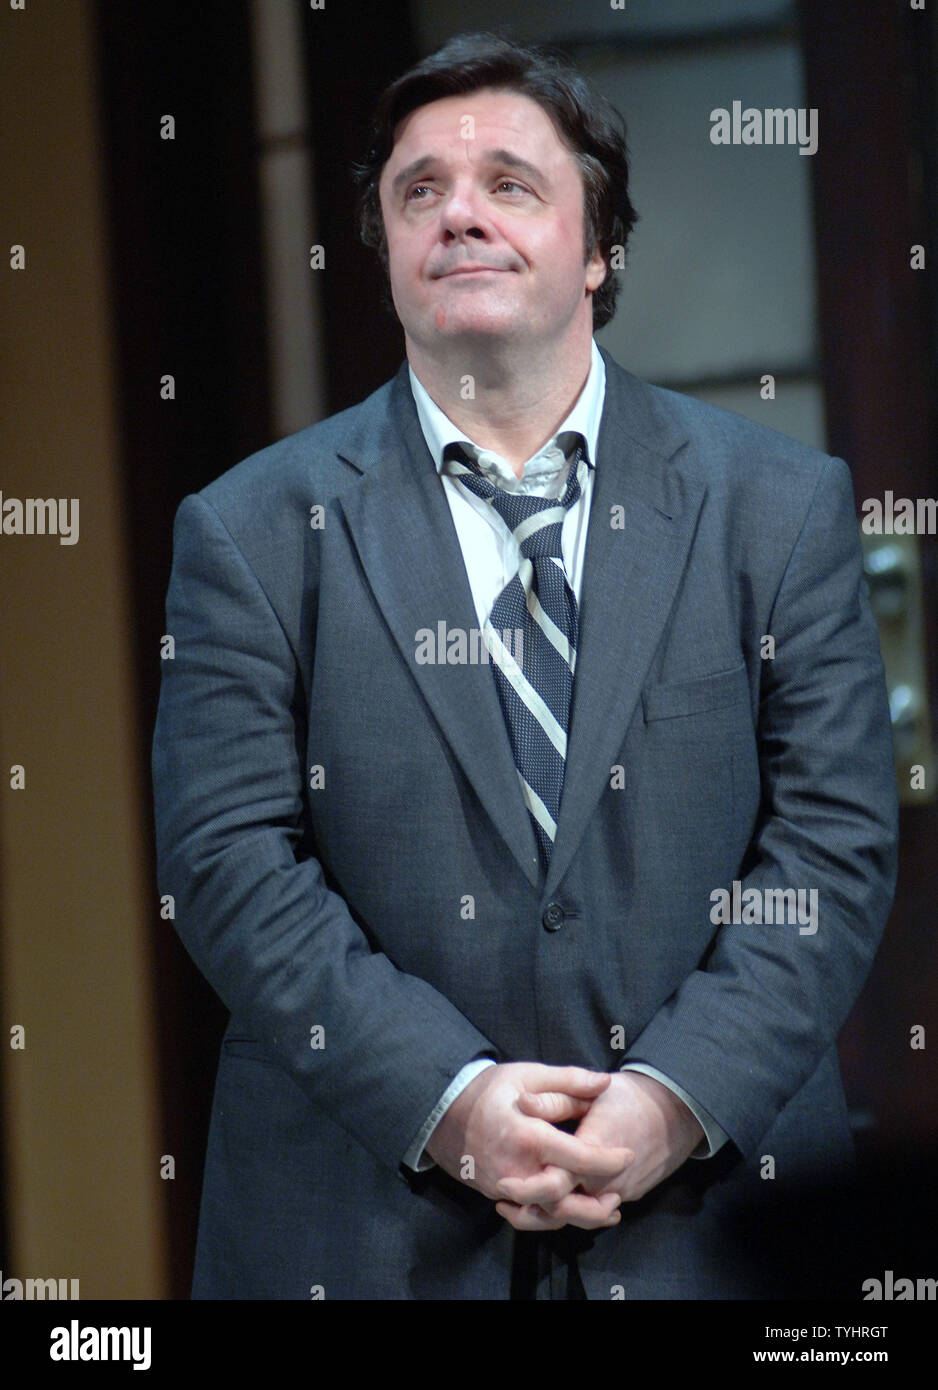 Actor Nathan Lane takes his opening night curtain call bows in the Simon Gray play 'Butley' which opened on Broadway at the Booth Theatre on October 25, 2006. (UPI Photo/Ezio Petersen) Stock Photo